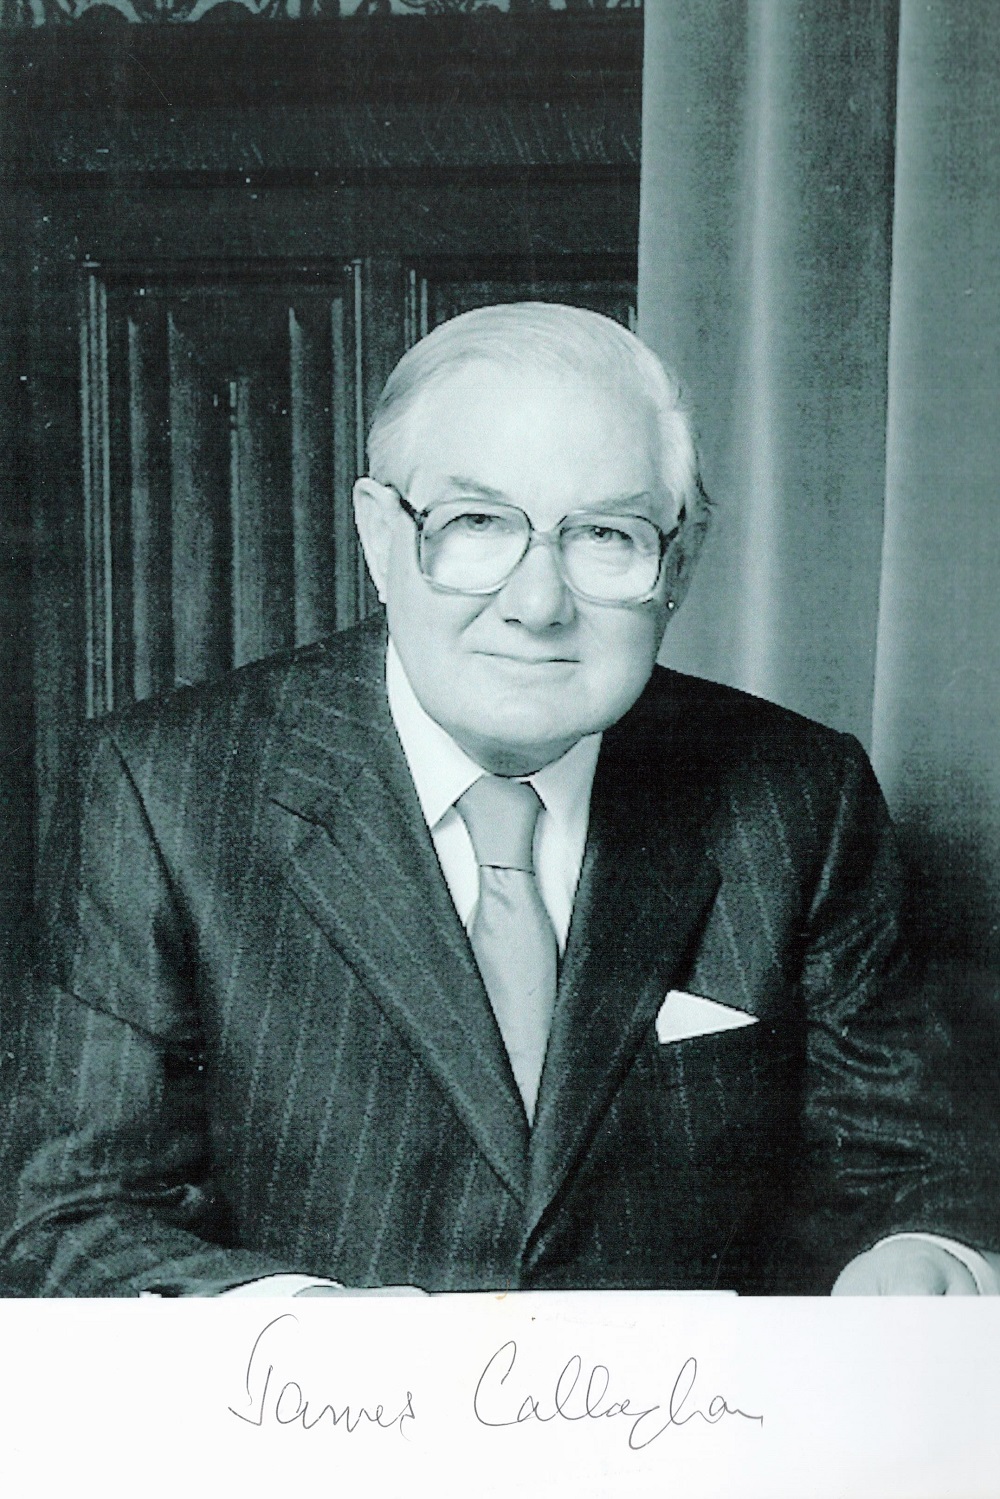 Former Prime Minister, James Callaghan signed 12x8 black and white photograph. Callaghan, was a